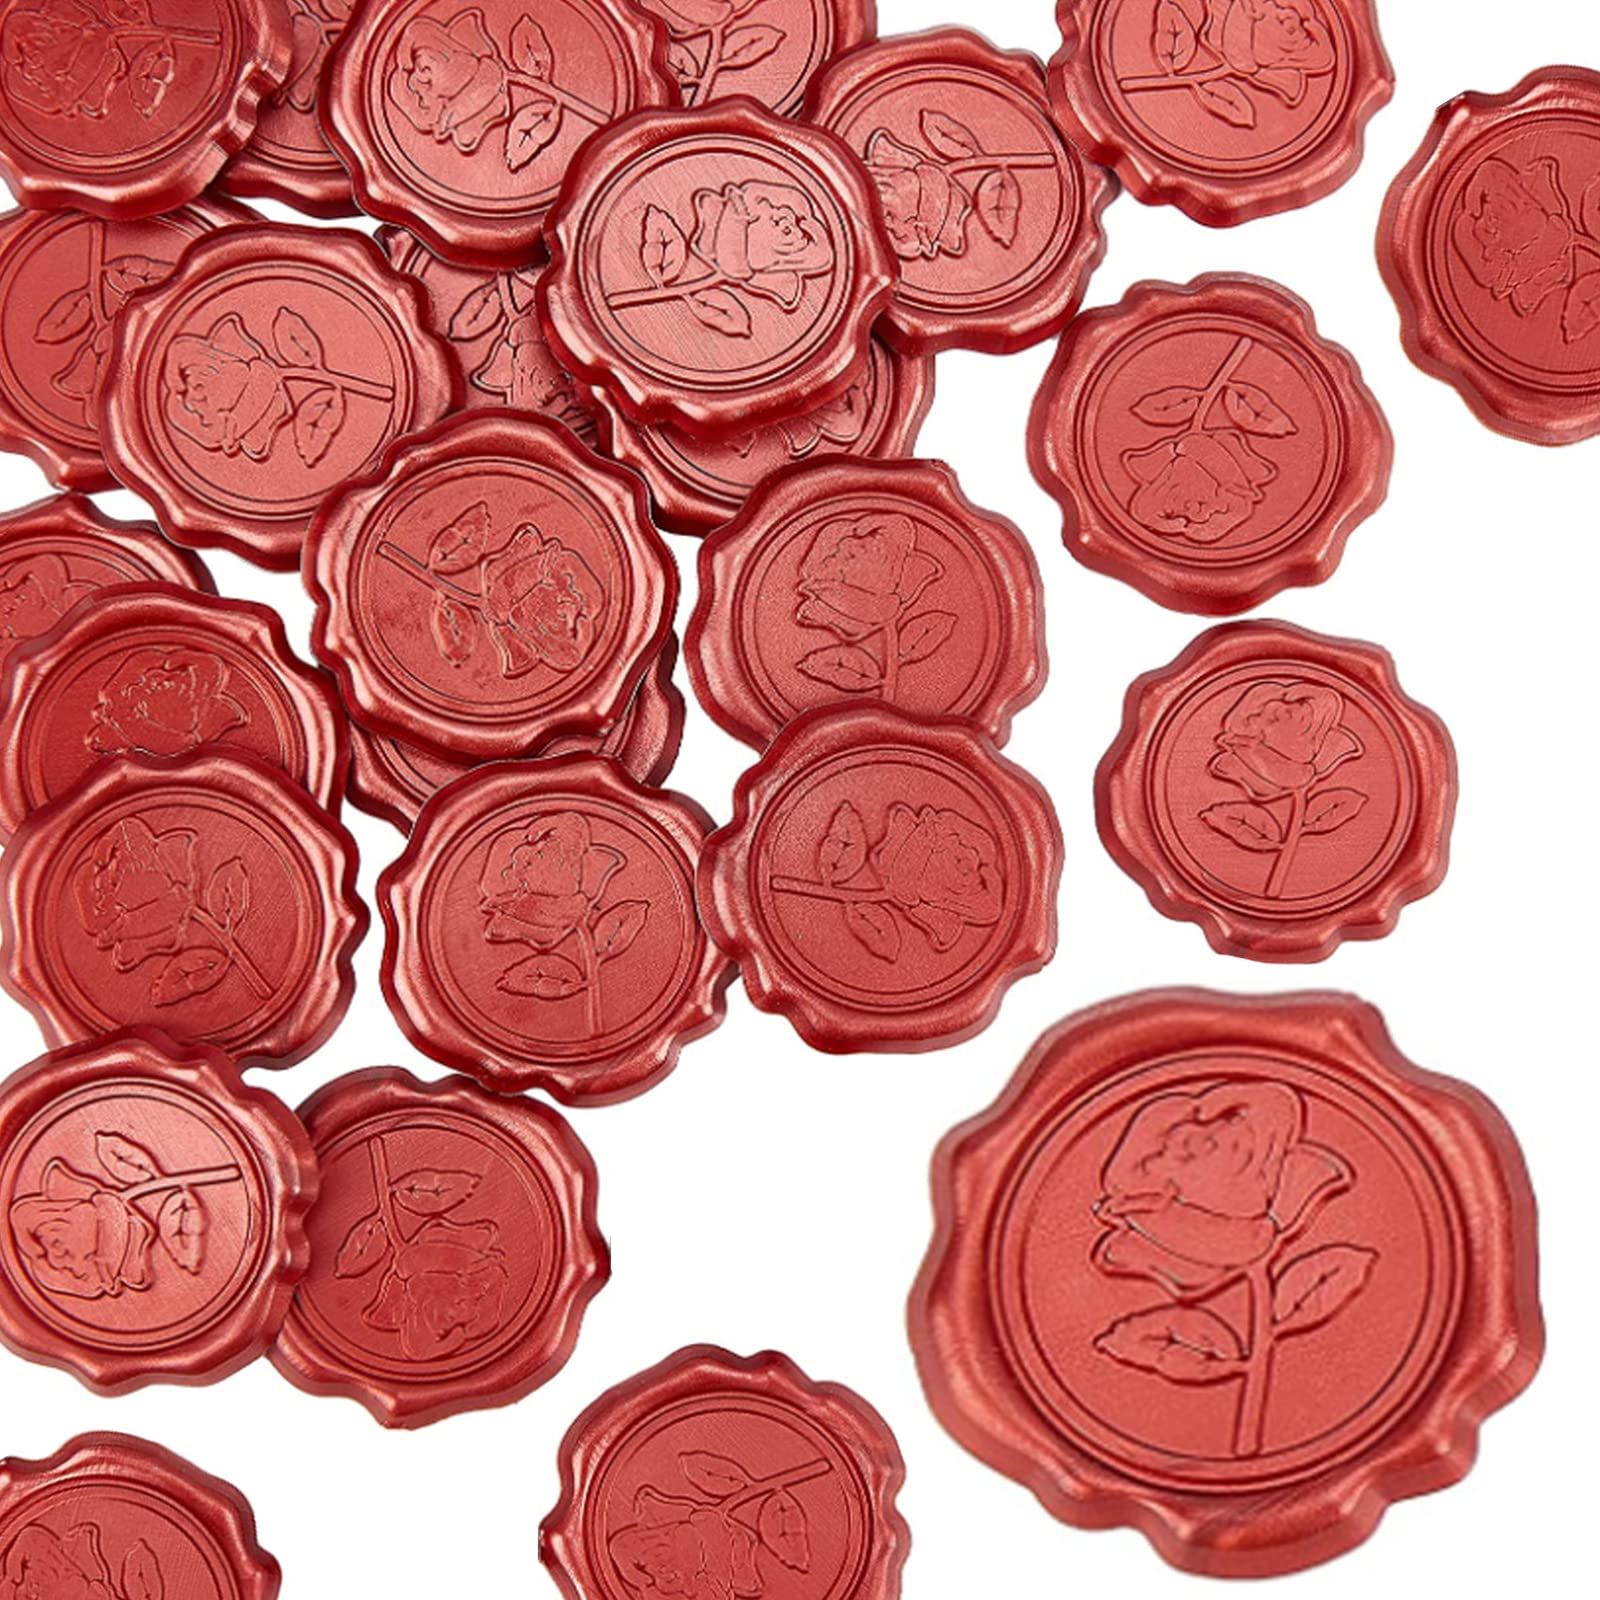 CRASPIRE Adhesive Wax Seal Stickers 25PCS Red Rose Wax Seal Sticker for  Envelopes Decorative Stamp Stickers